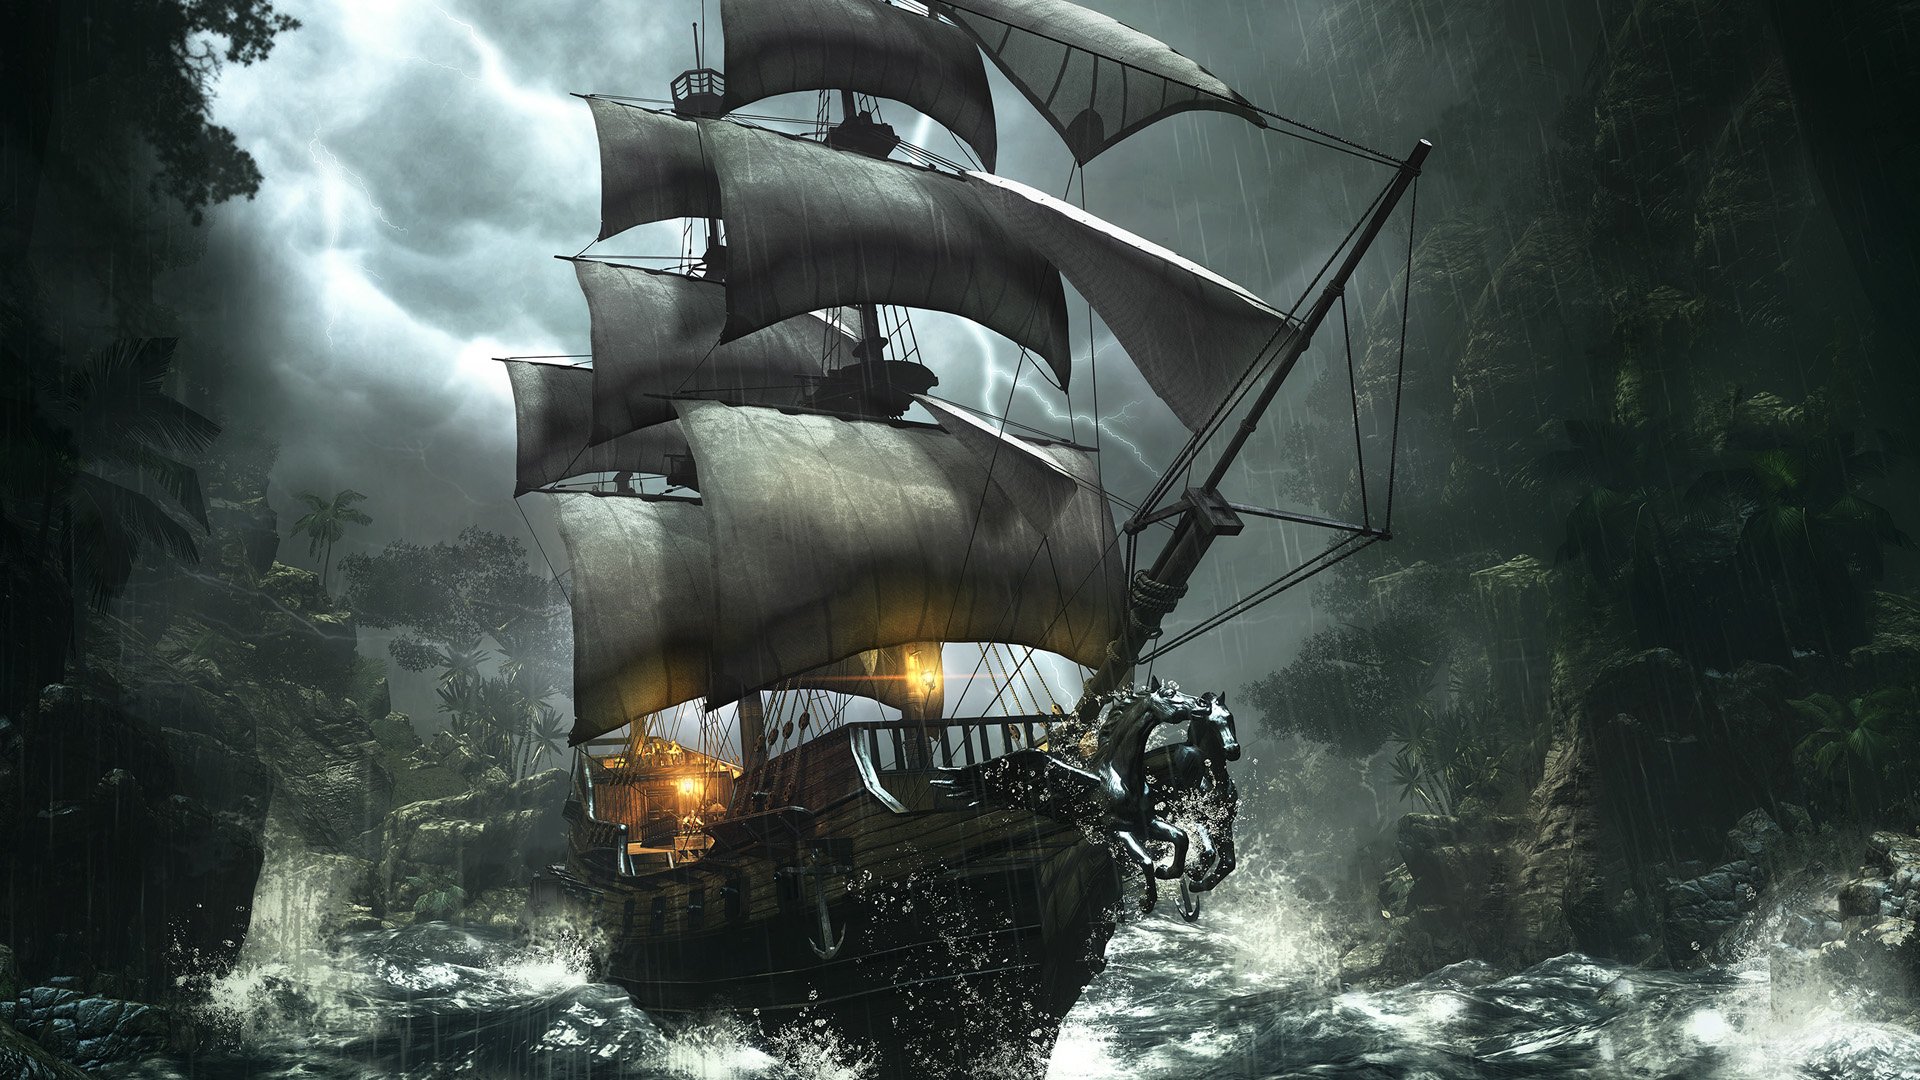 You Can Pirate Ship Wallpaper Desktop 1dksc In Your